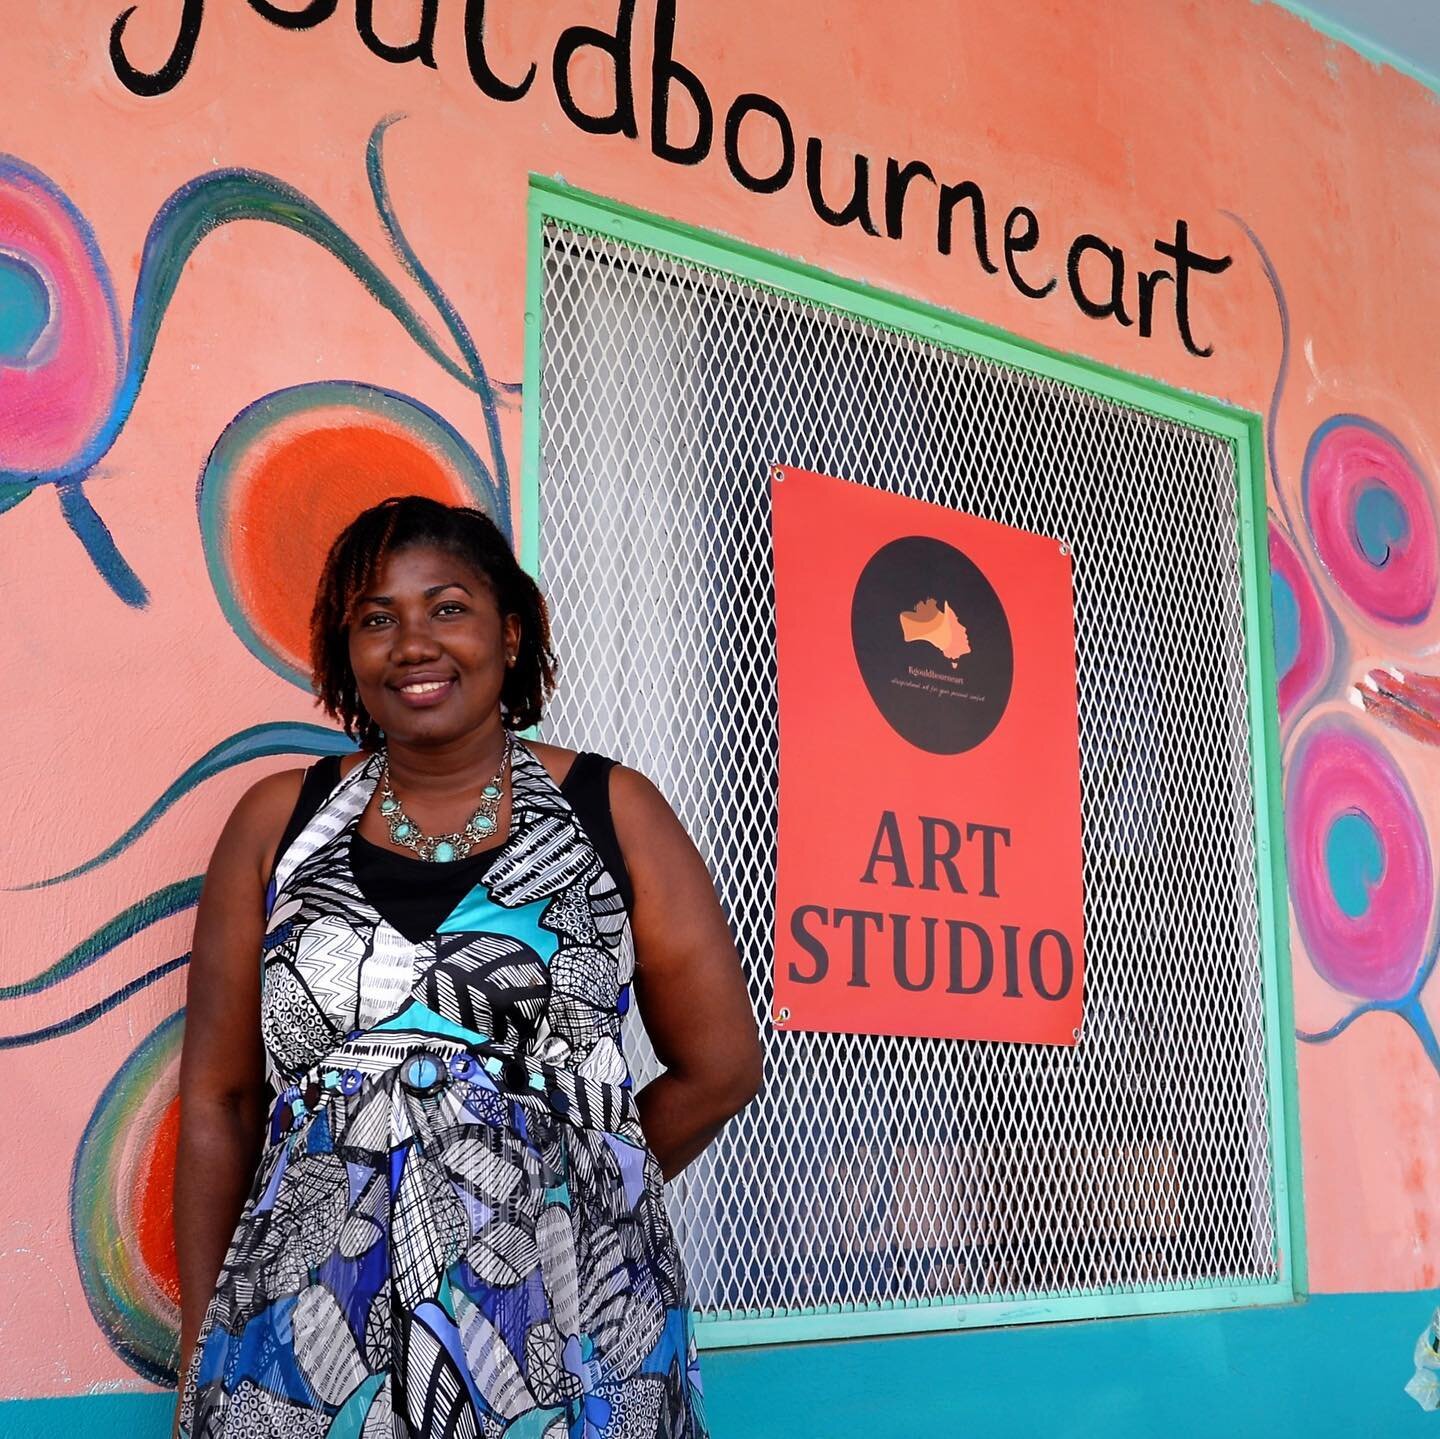 Located in West Bay, the Kgouldbourne Art Studio is new to Cayman&rsquo;s gallery scene, having opened in late 2021. The gallery features work by its namesake artist and teacher Kaydia Gouldbourne. The studio showcases Kaydia&rsquo;s fine art and jew